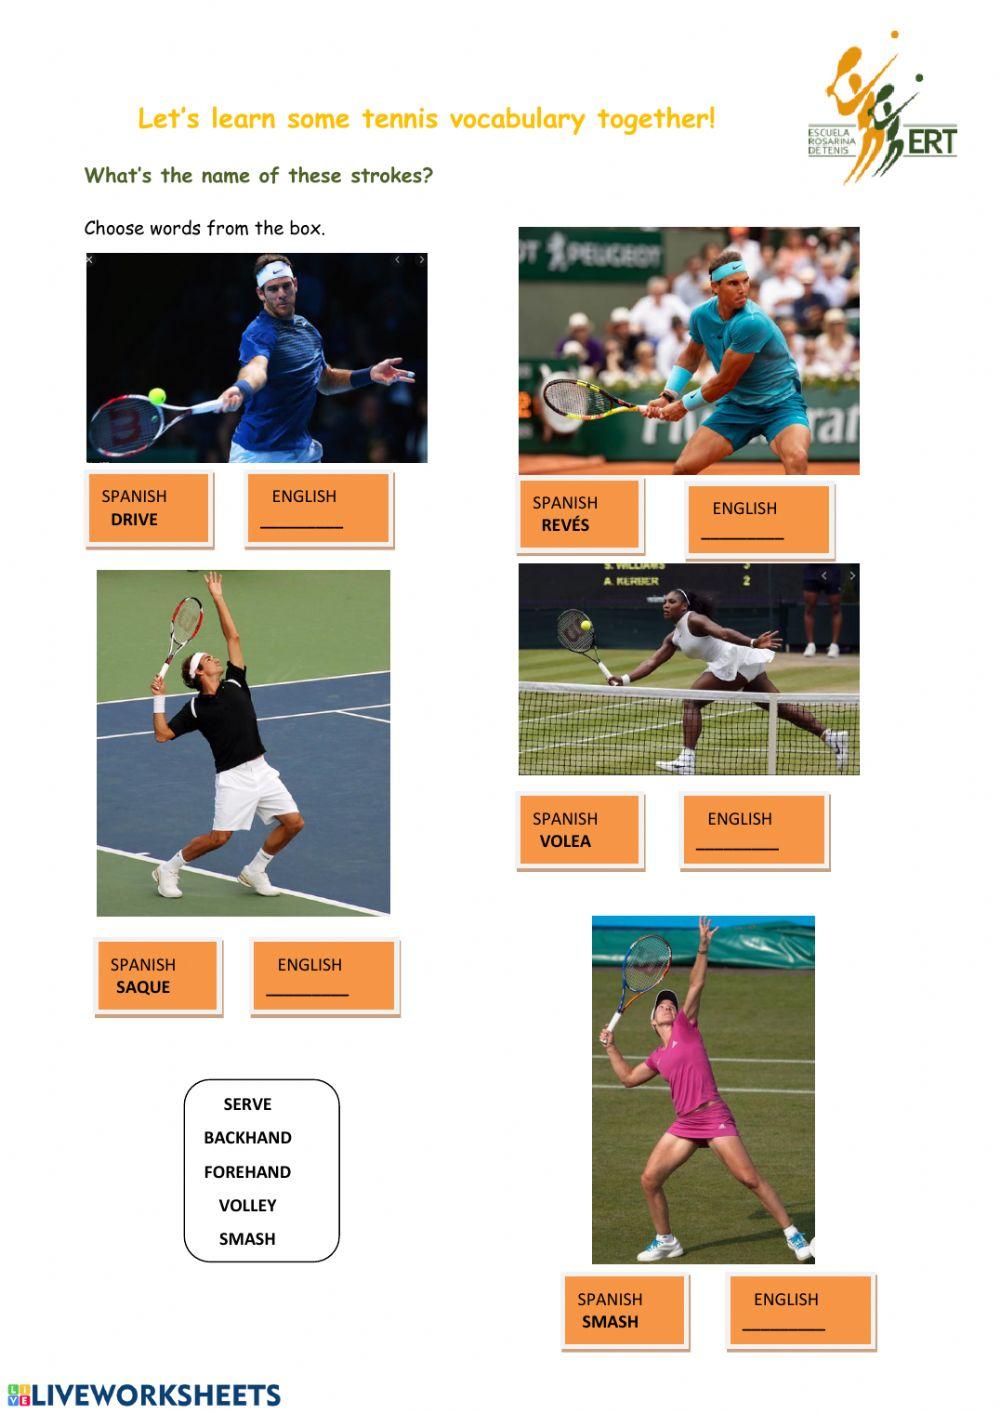 Tennis vocabulary-Strokes online exercise for | Live Worksheets